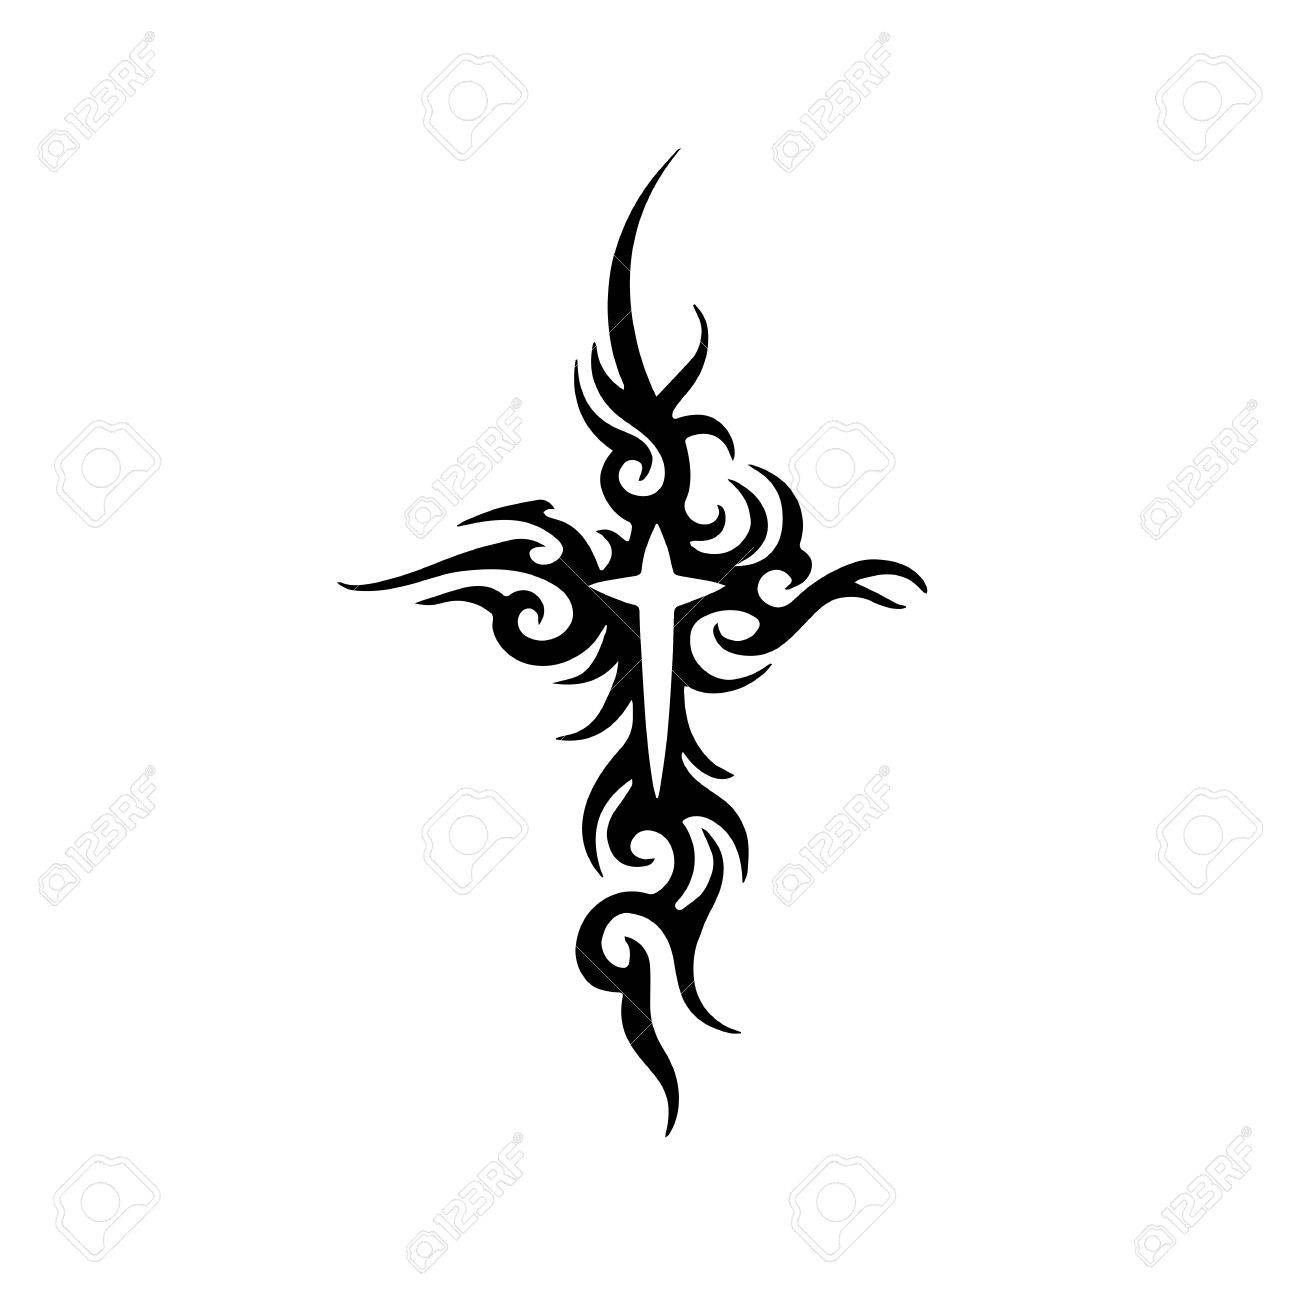 Tribal Cross Tattoo Design Royalty Free Cliparts Vectors And Stock pertaining to measurements 1300 X 1300